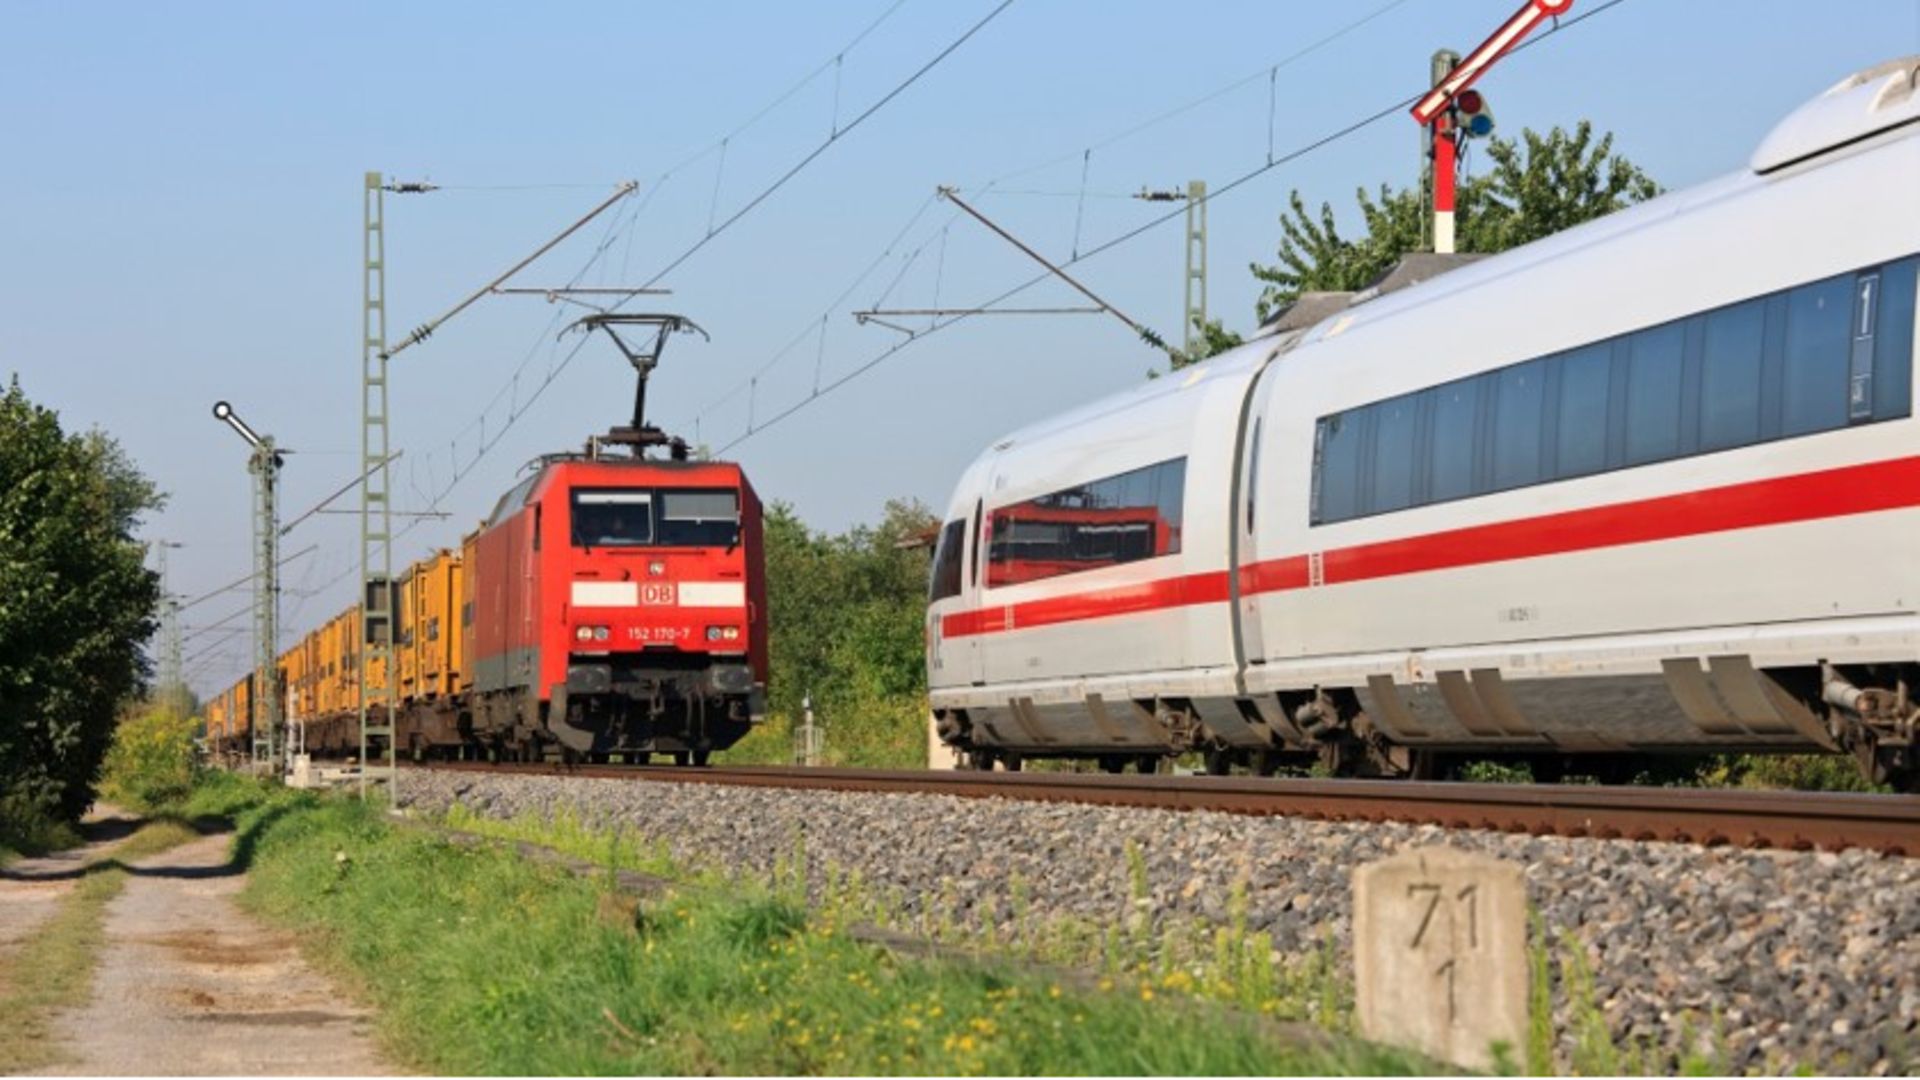 Rail service operating in Europe